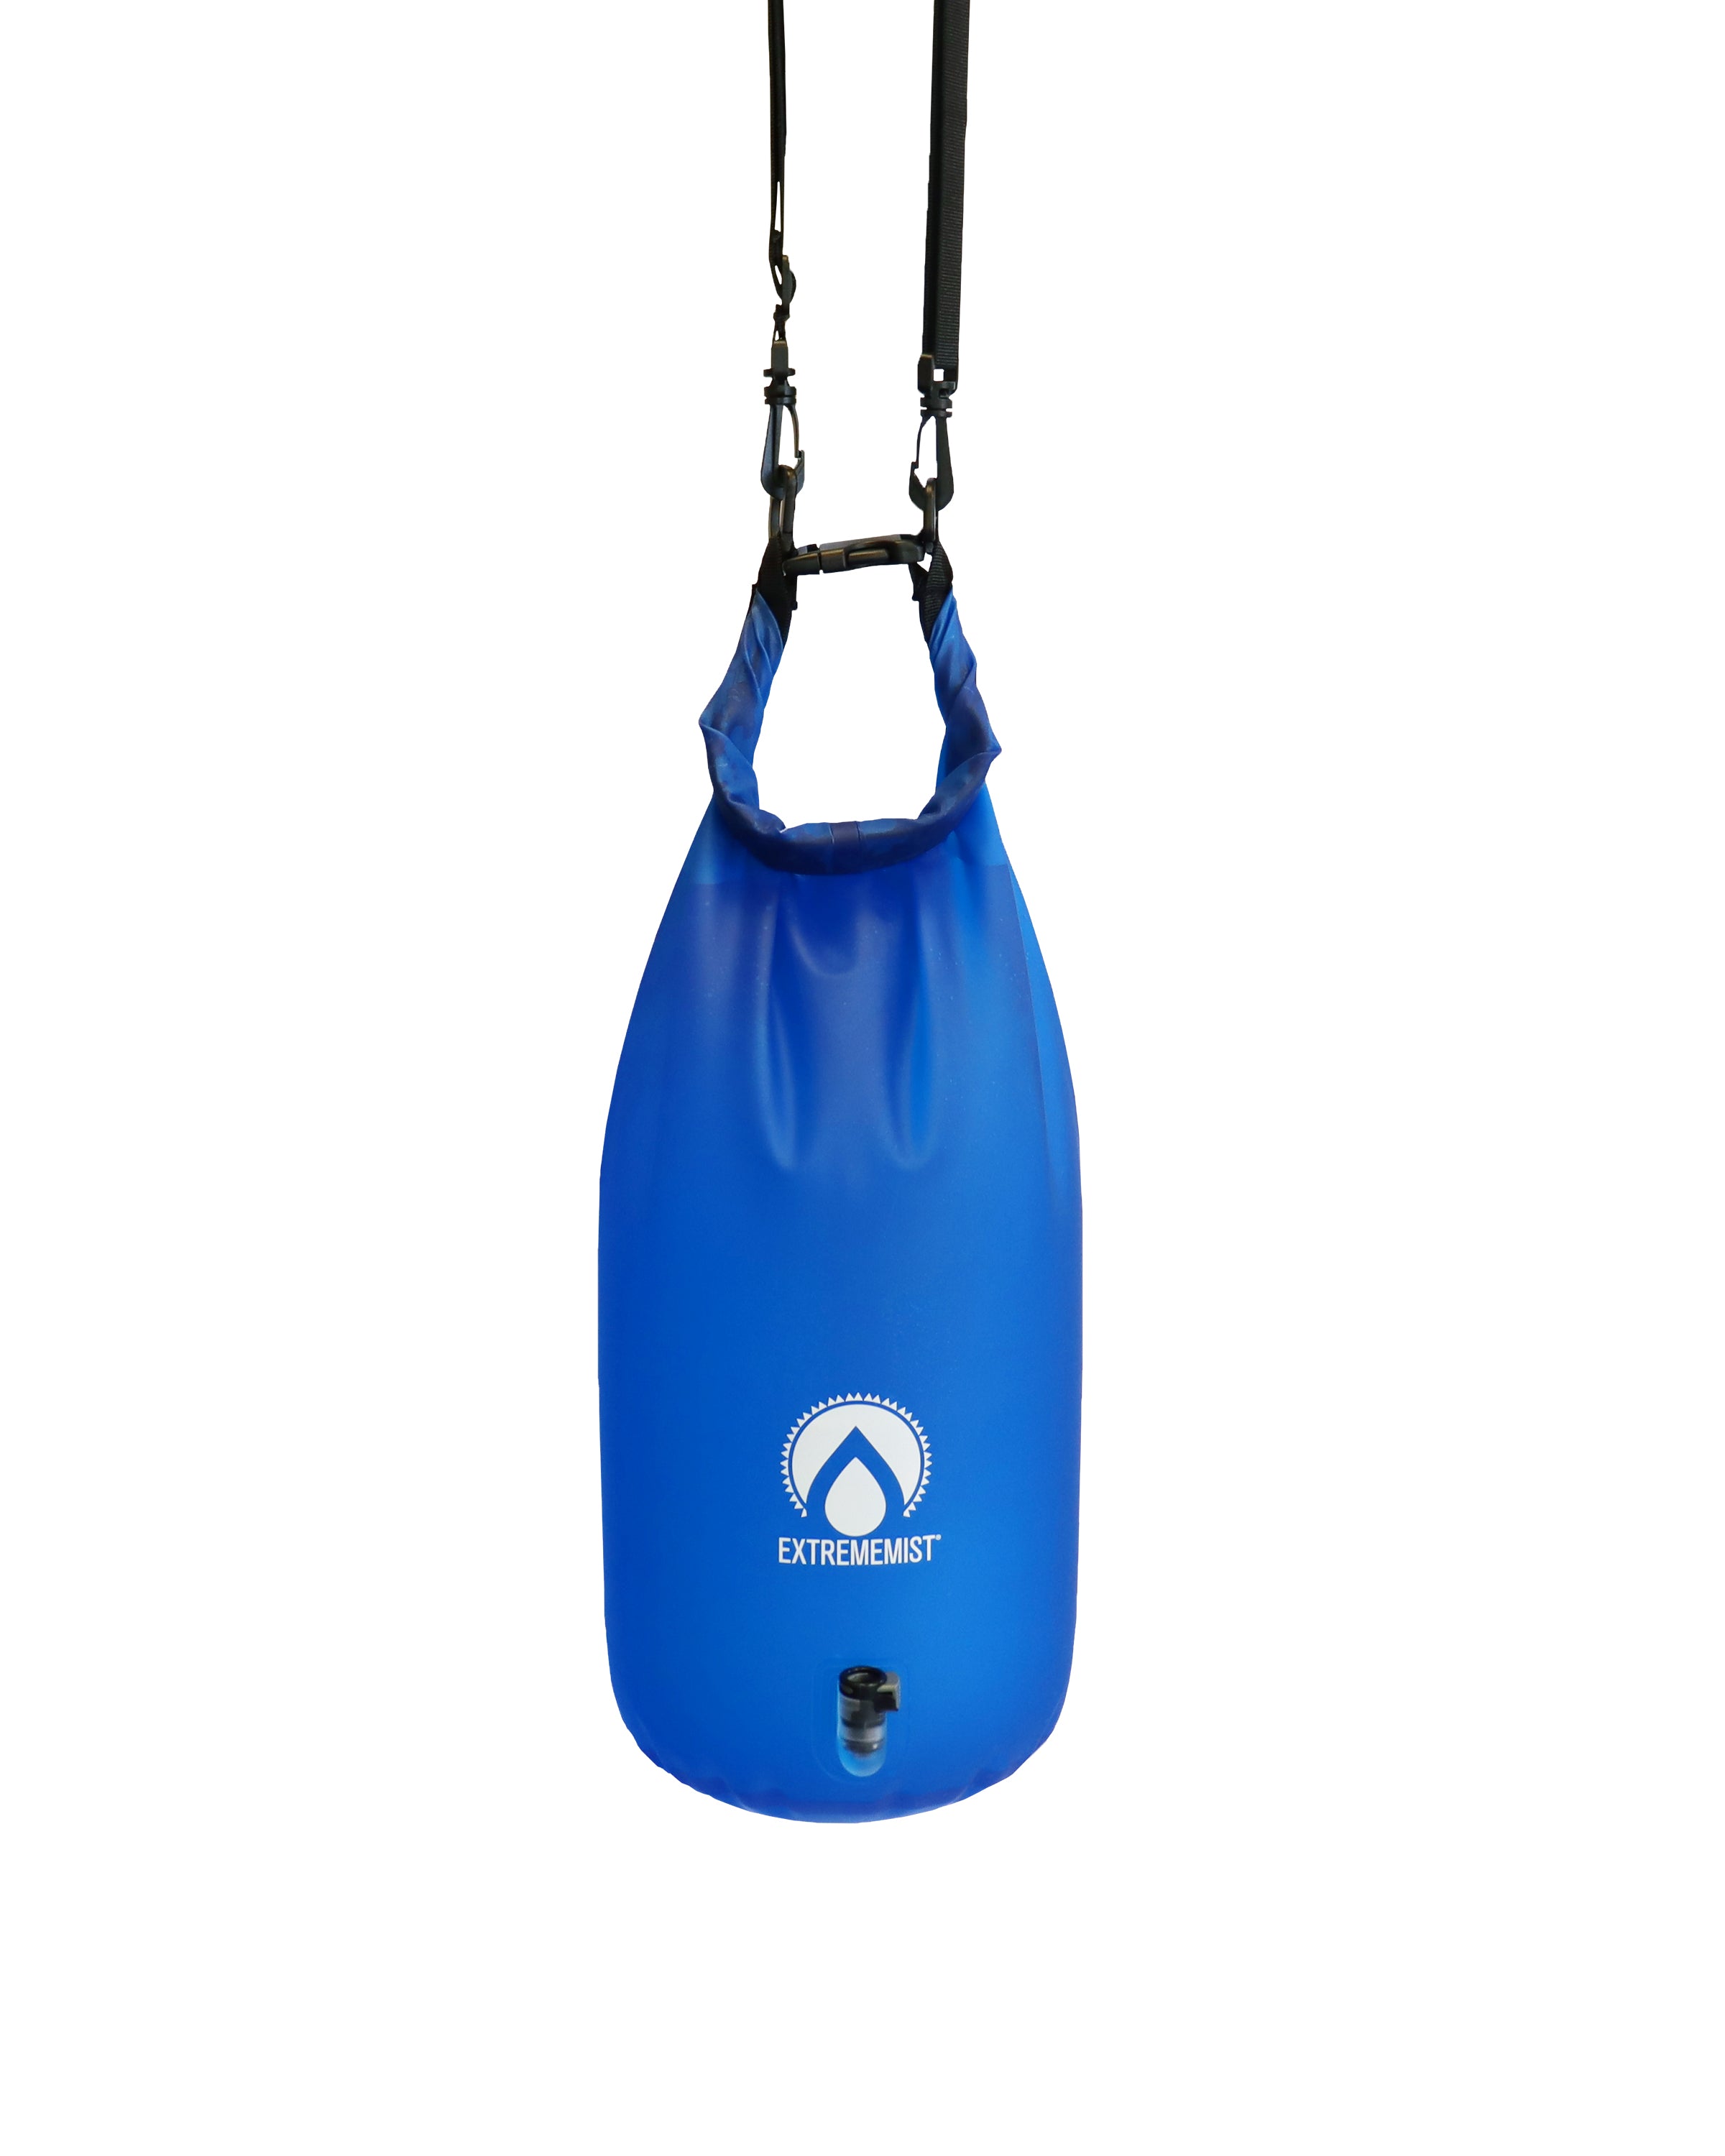 10 liter water container bag suspended